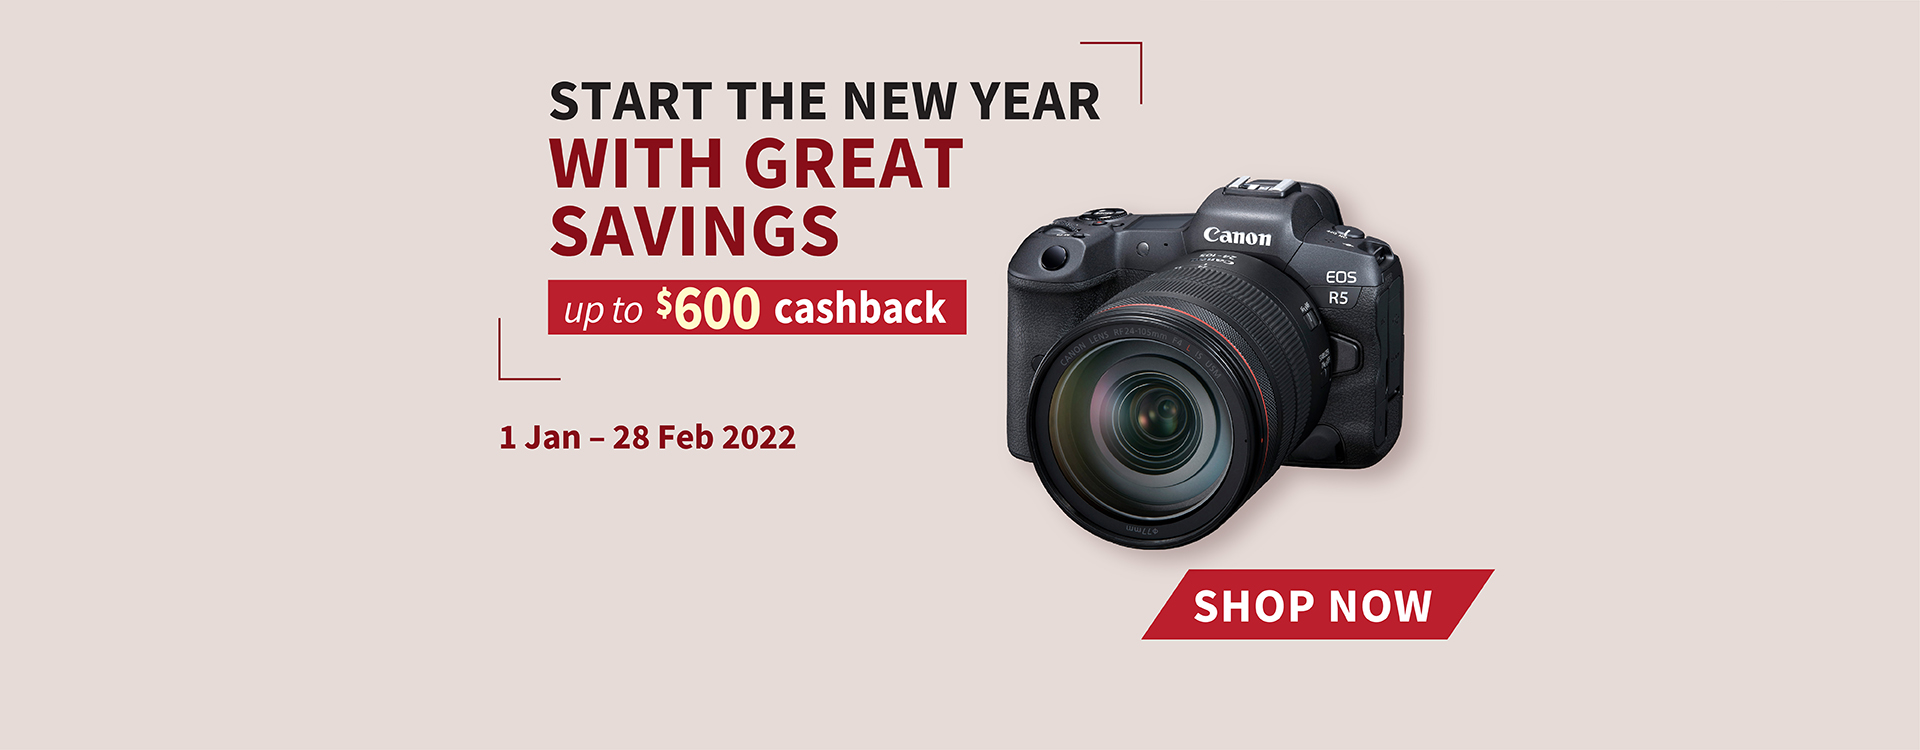 START THE NEW YEAR WITH GREAT SAVINGS